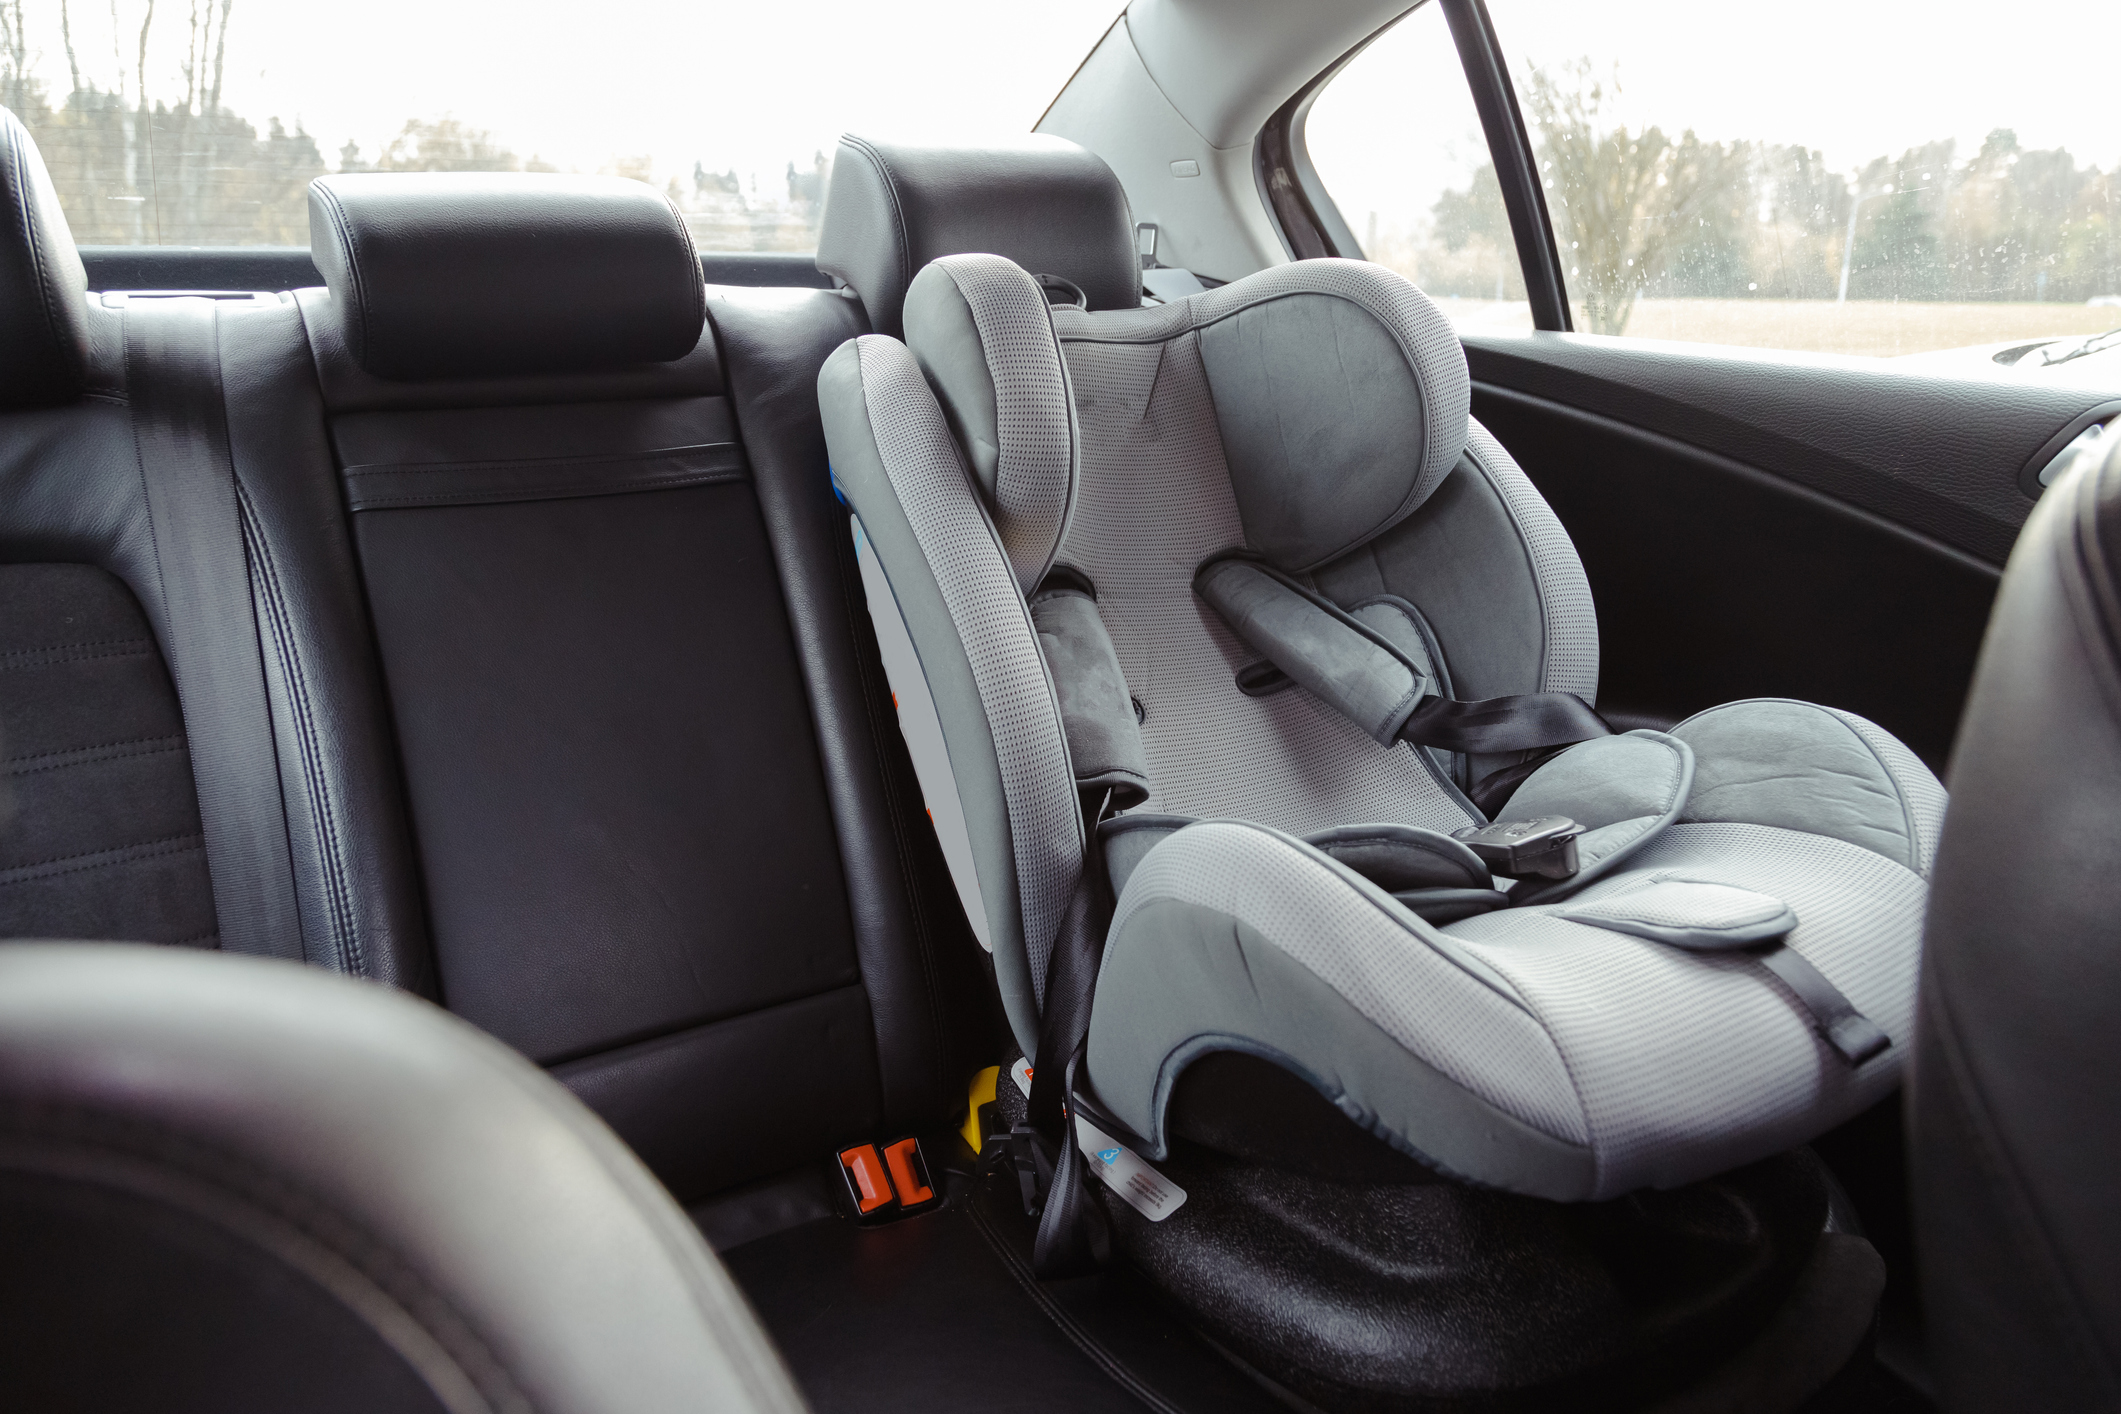 How repairers can spread car seat safety awareness